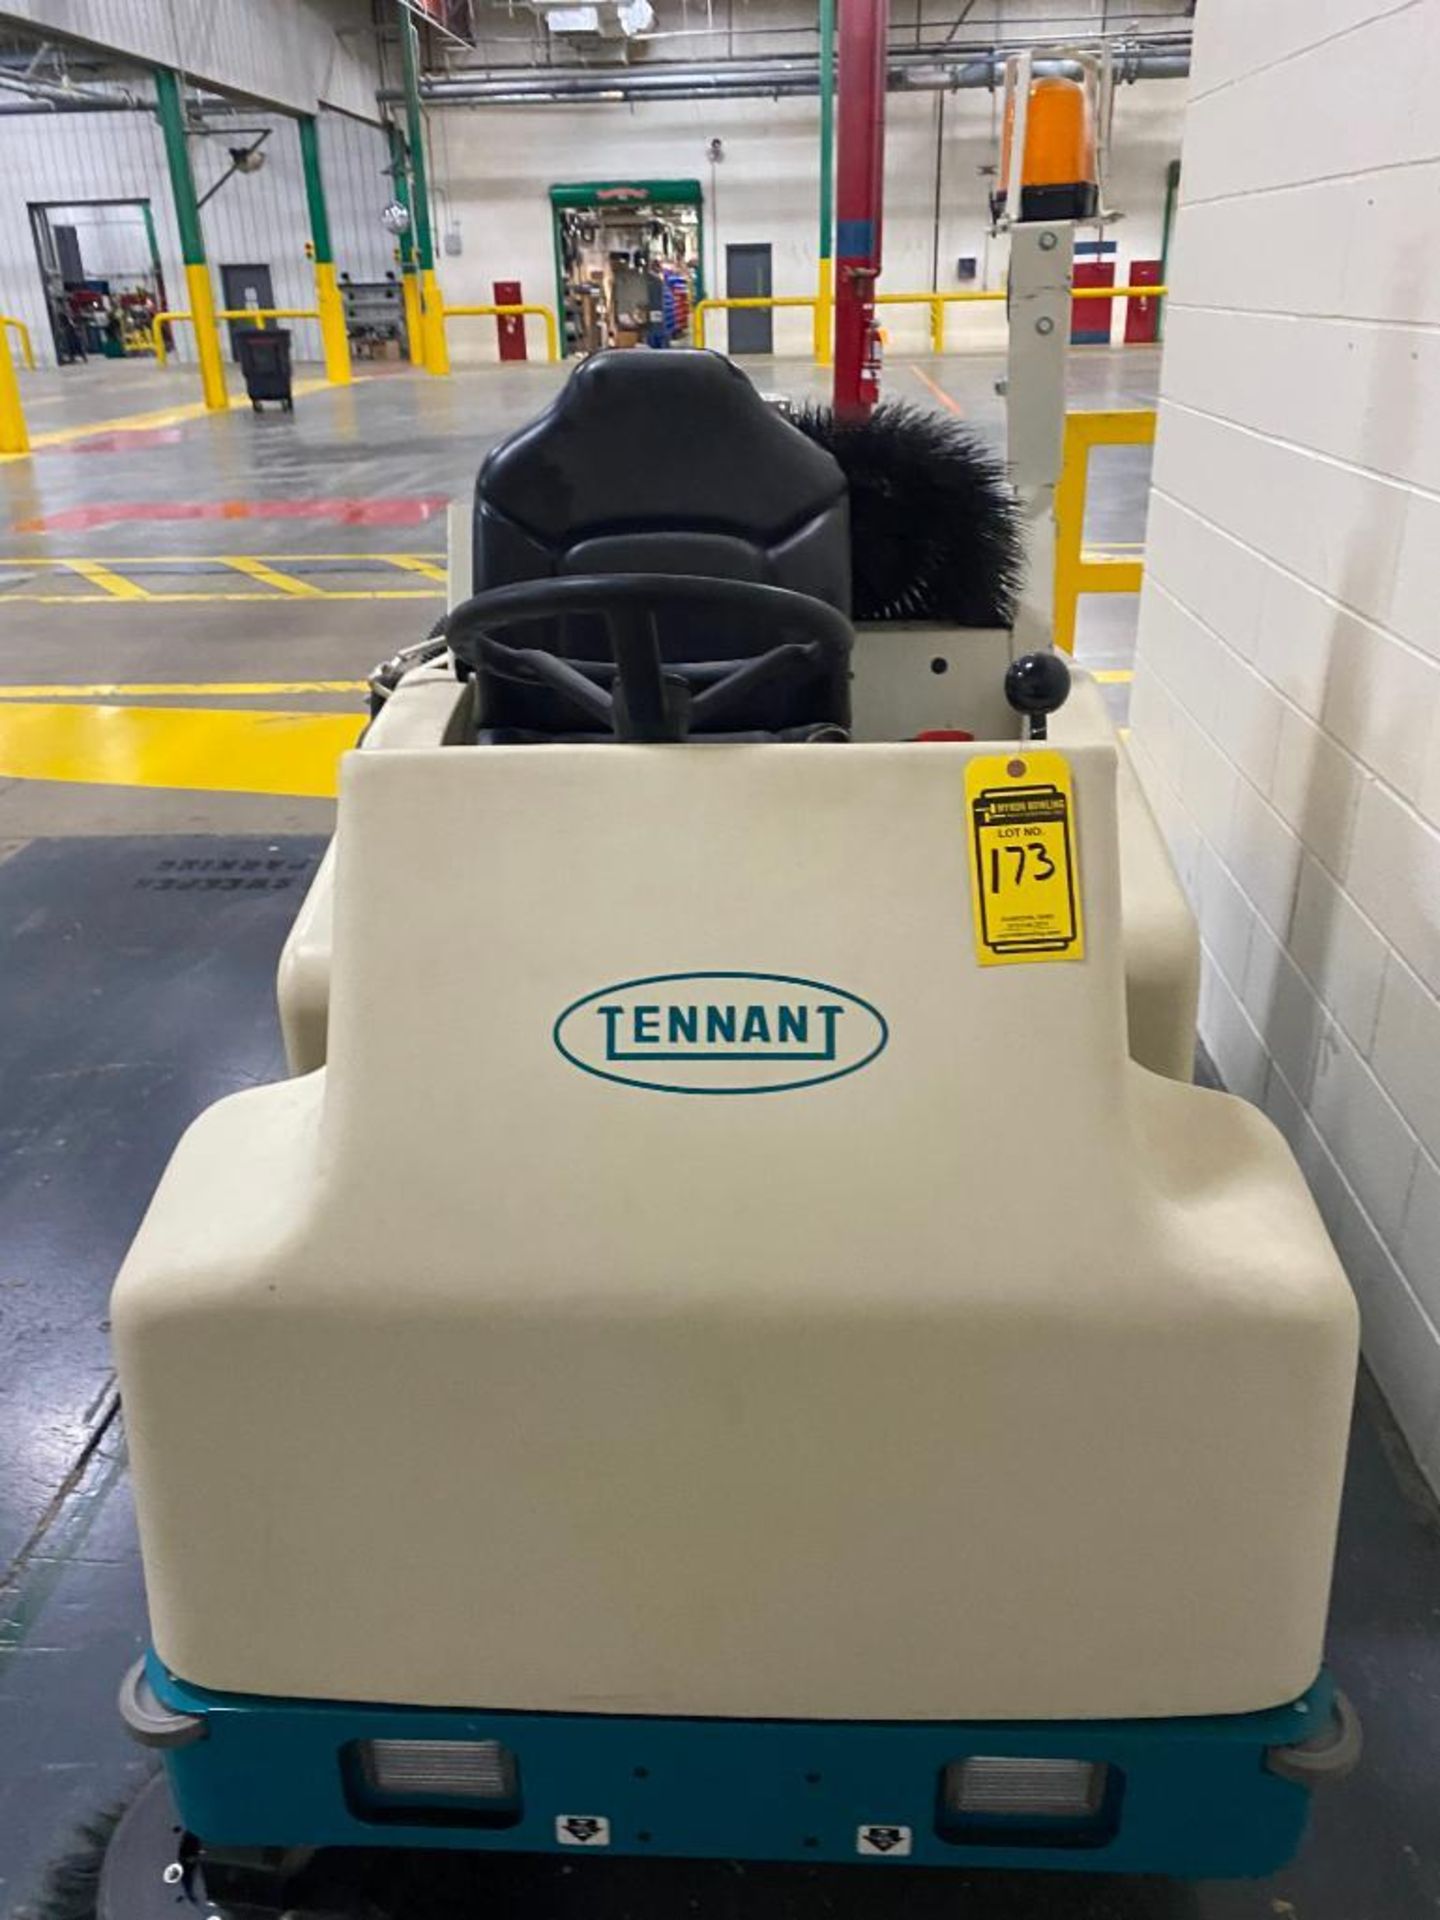 Tennant 6200 Floor Scrubber, 457 Hours, 36 V (Needs New Batteries) - Image 2 of 3